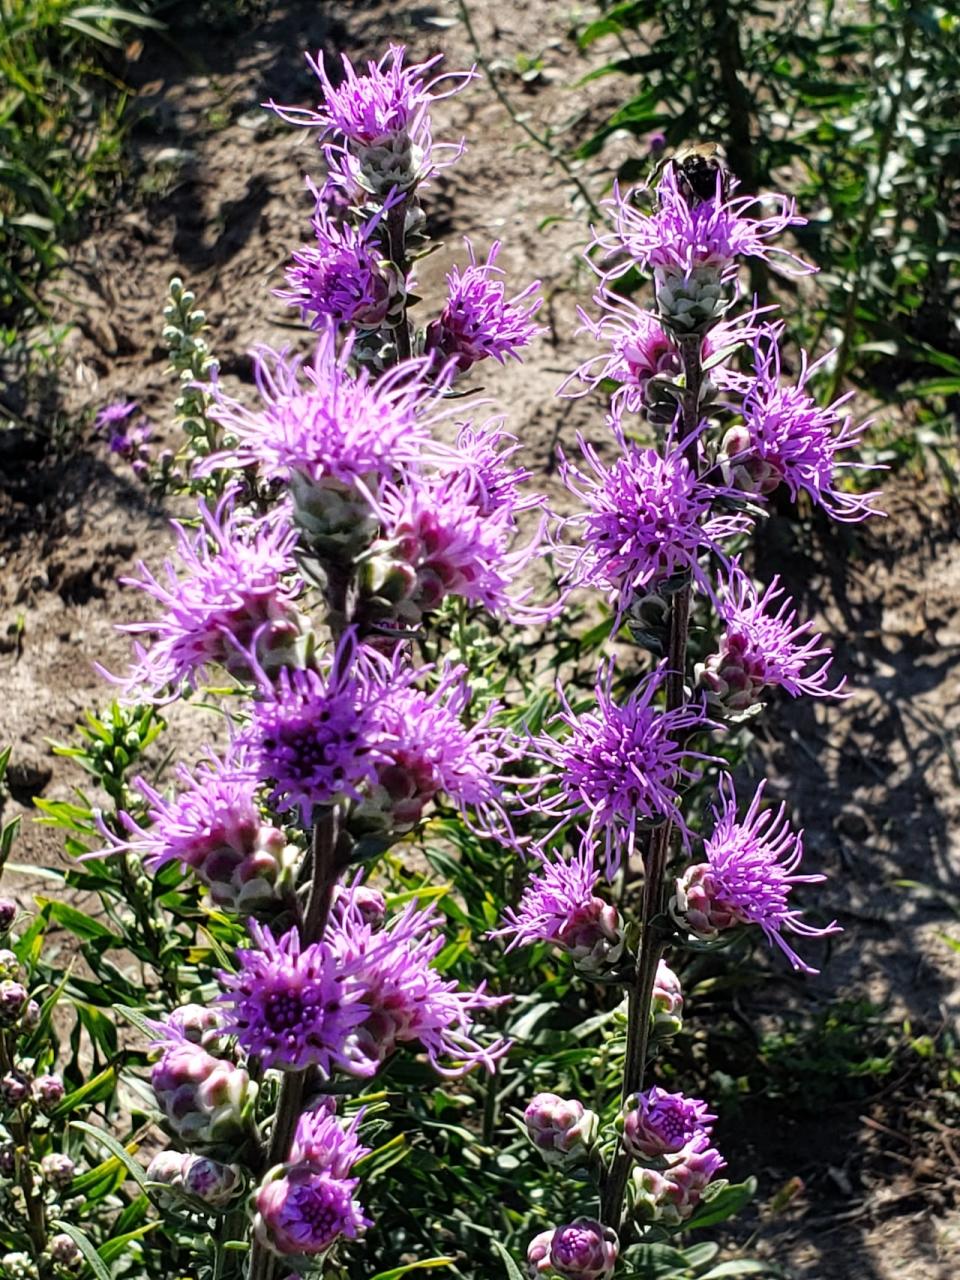 Liatris pycnostachya appears on a sunny day in this undated photo. Liatris is Sullivan's favorite native plant.